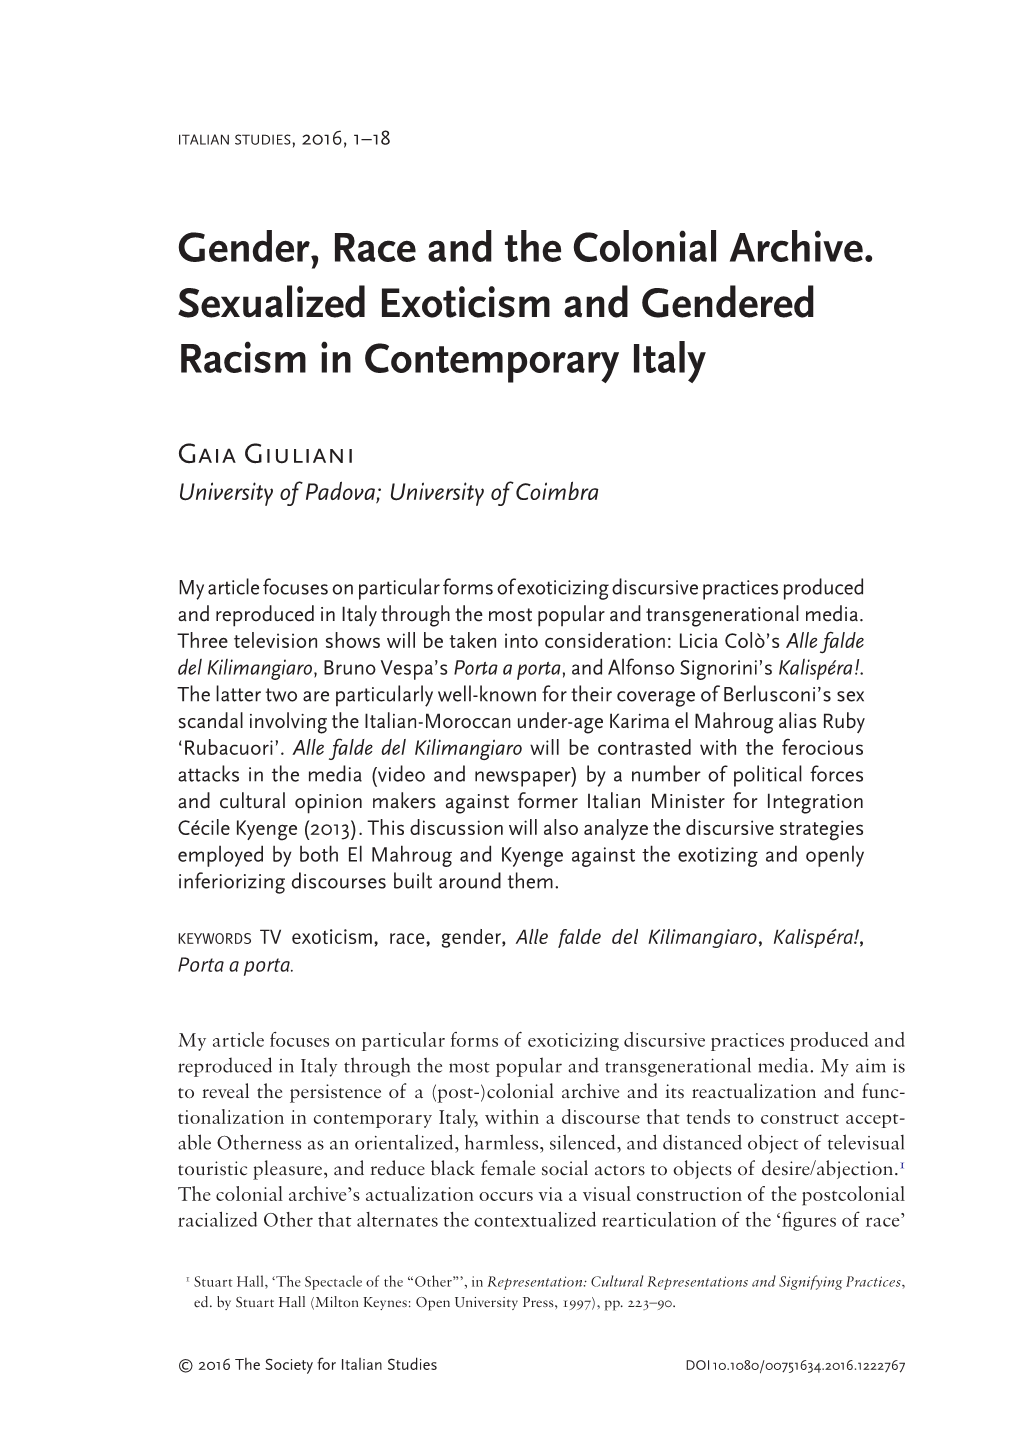 Gender, Race and the Colonial Archive. Sexualized Exoticism and Gendered Racism in Contemporary Italy